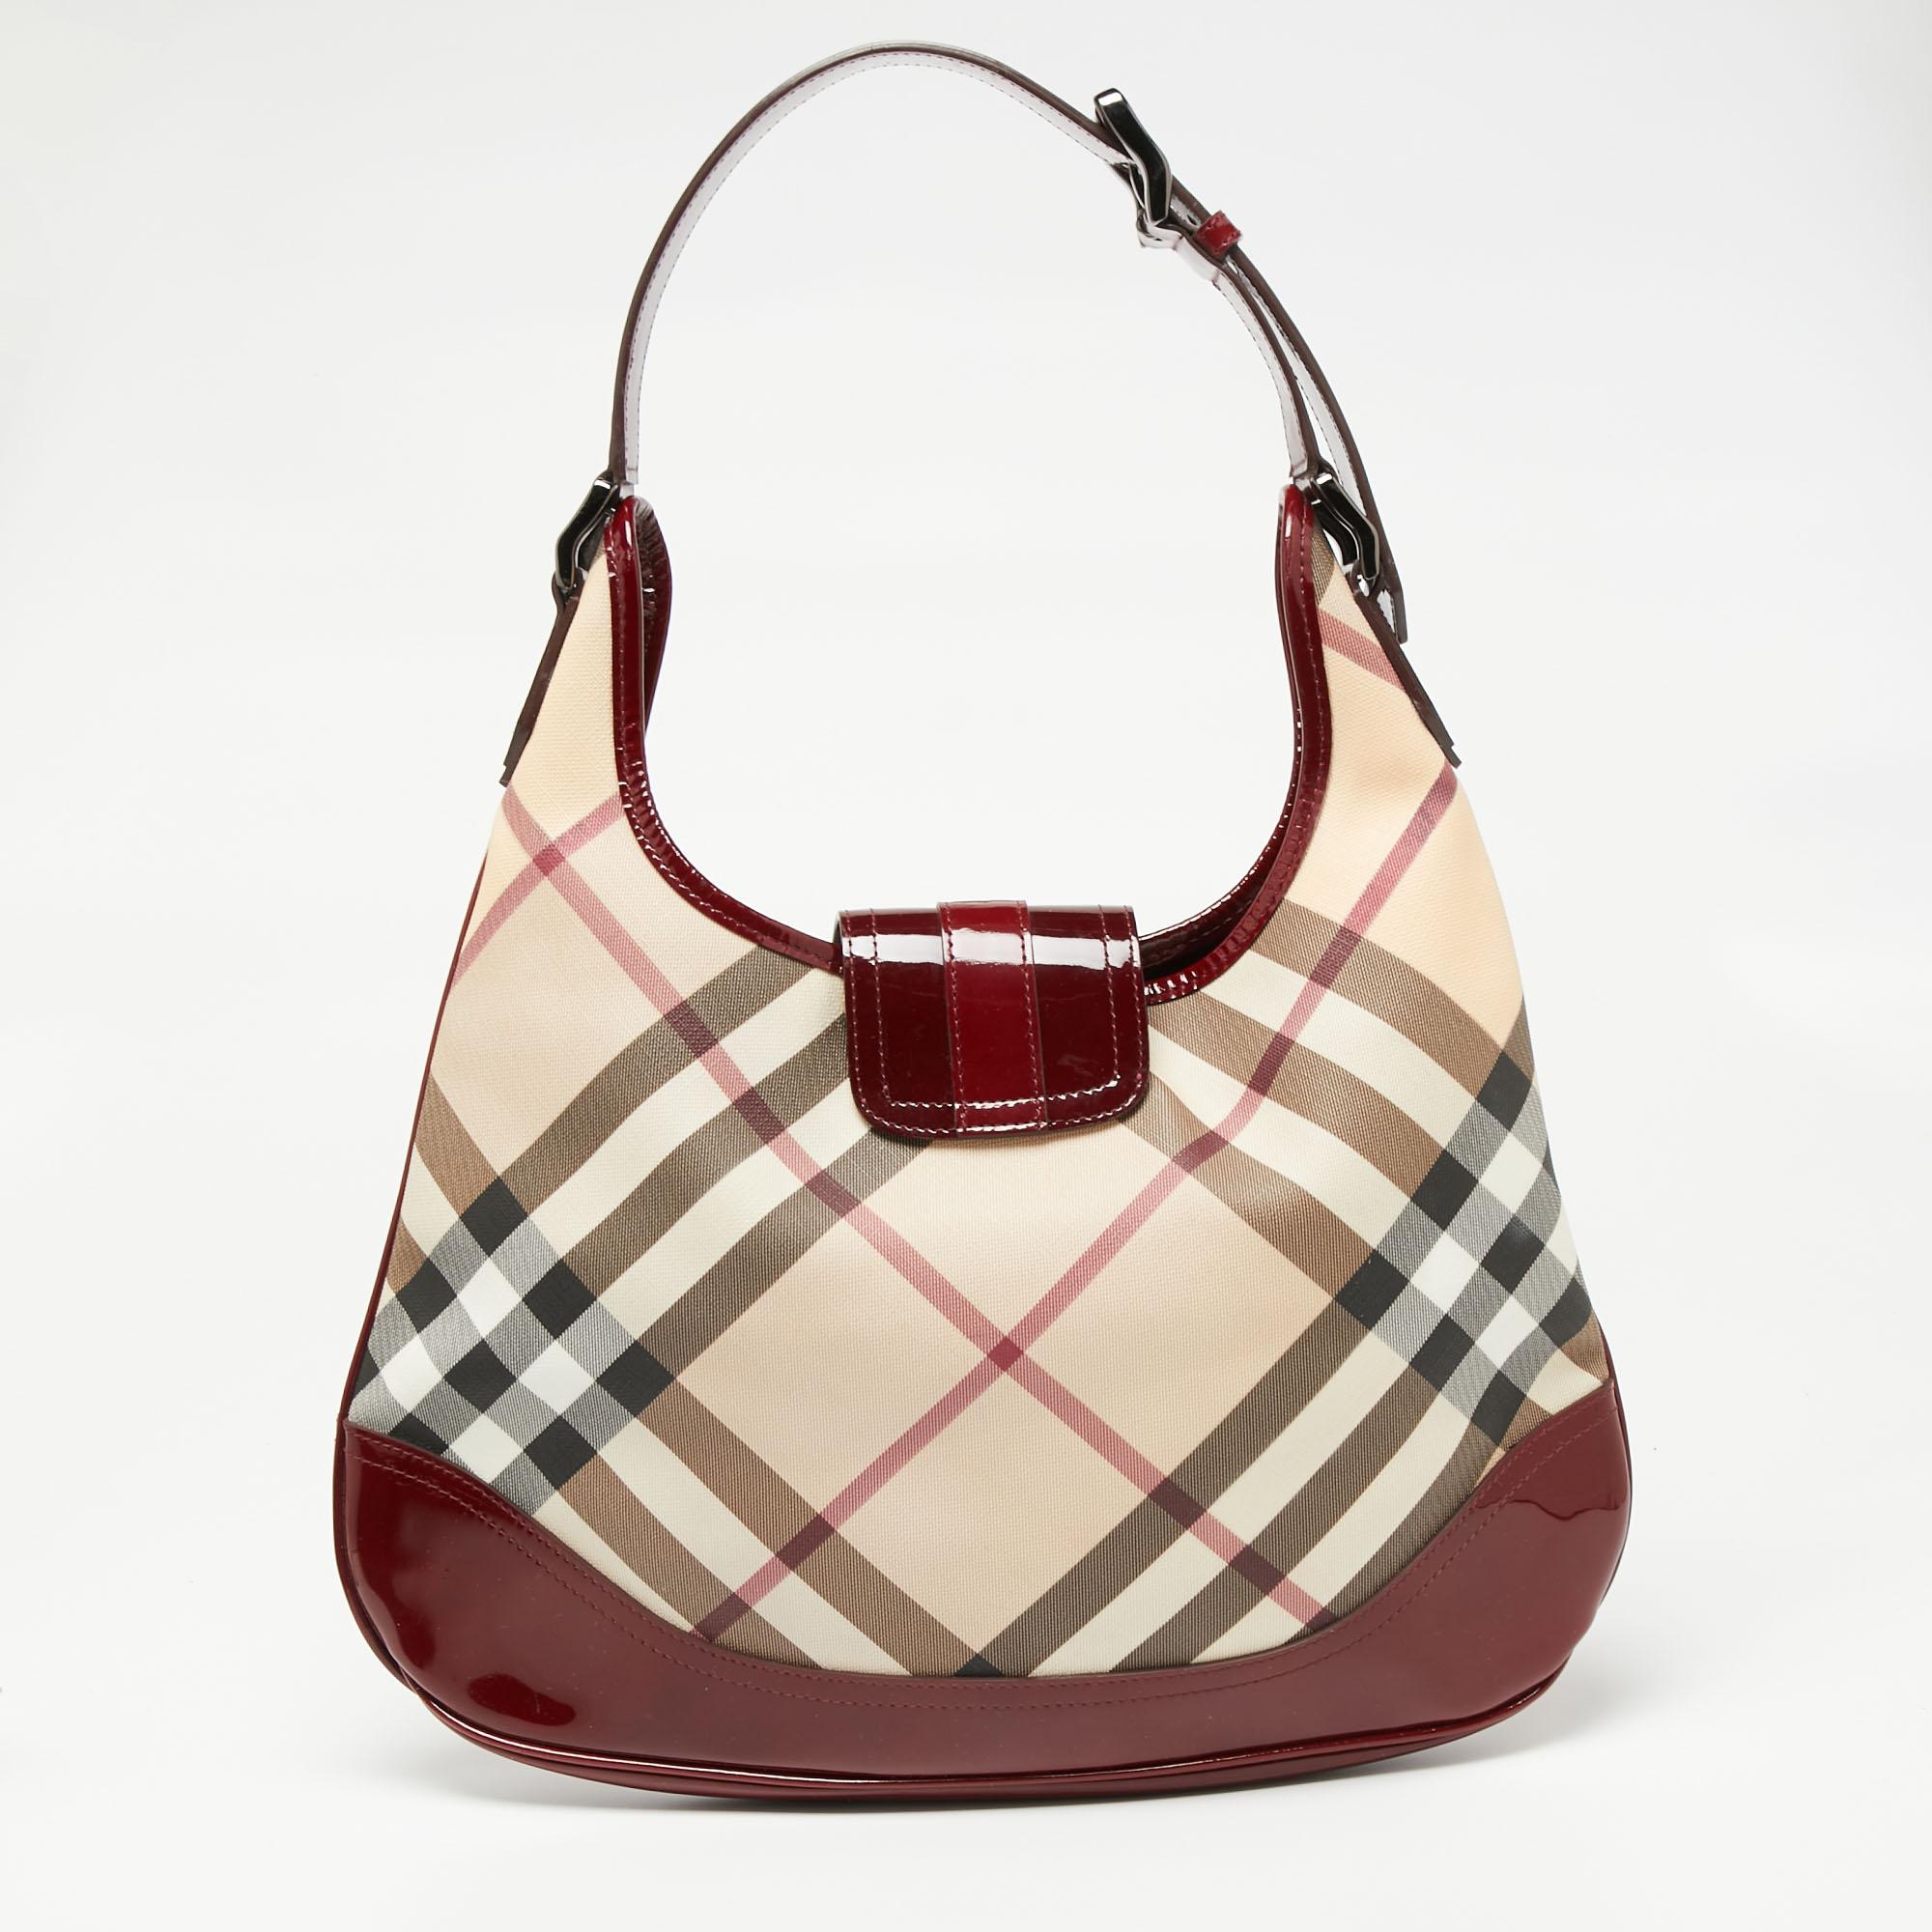 This beautifully stitched hobo in Nova Check PVC and patent leather is by Burberry. With a capacious fabric-lined interior, a comfortable handle, and a fine finish, this hobo is bound to offer style and practical ease.

Includes: Info card